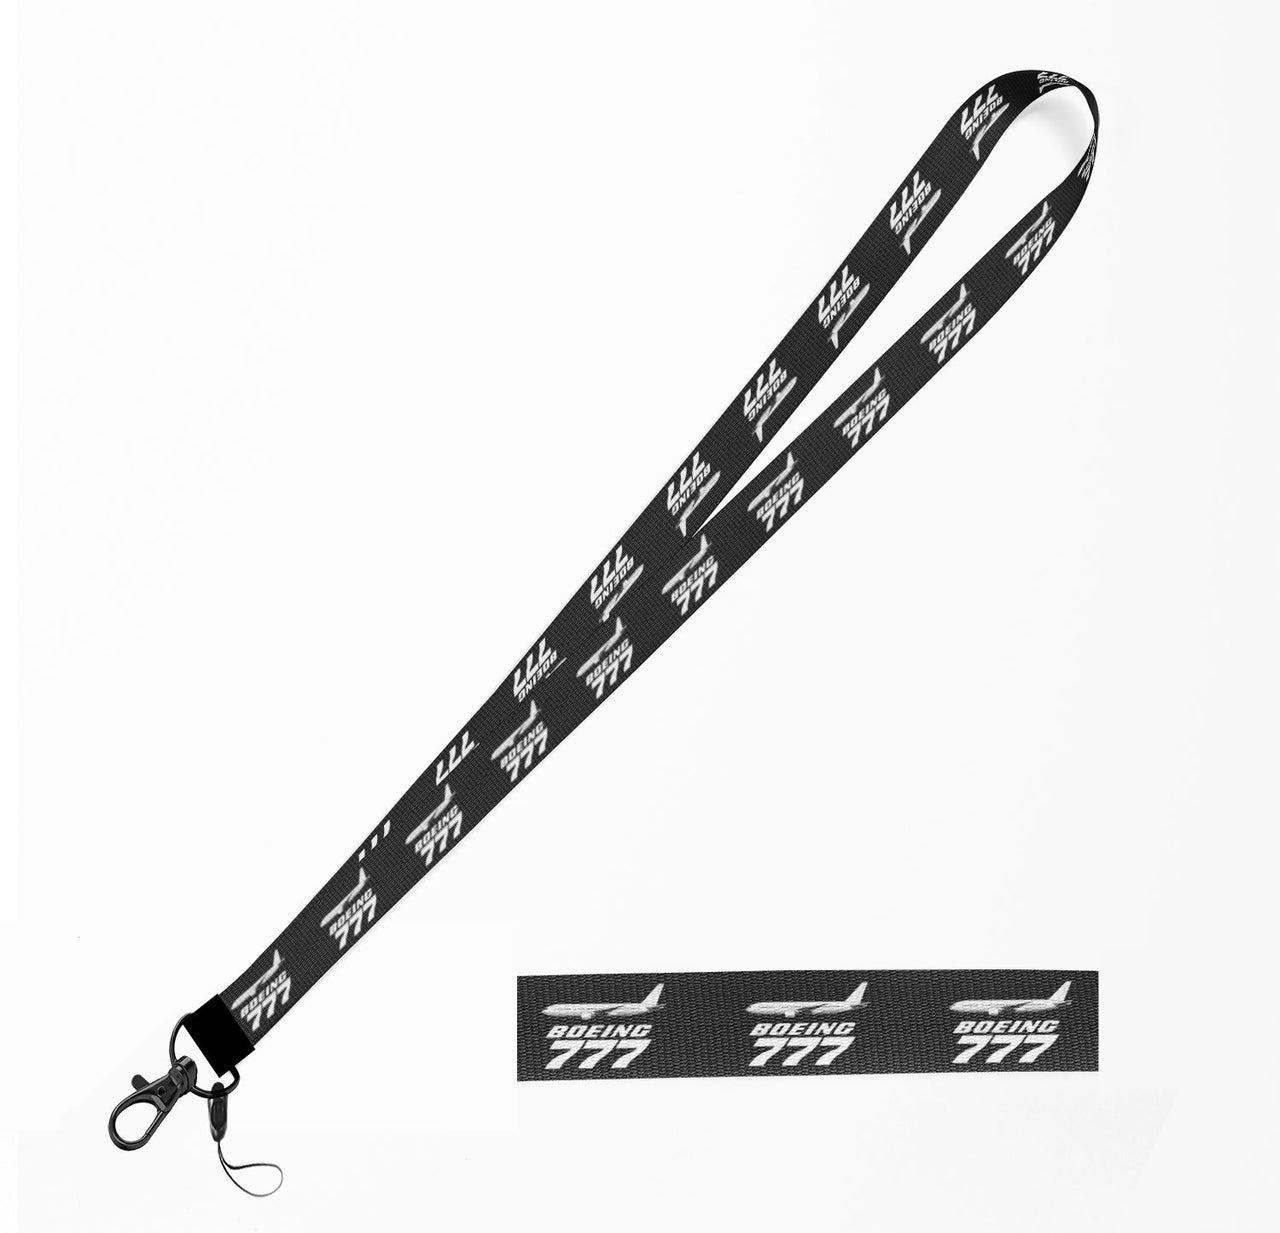 The Boeing 777 Designed Lanyard & ID Holders